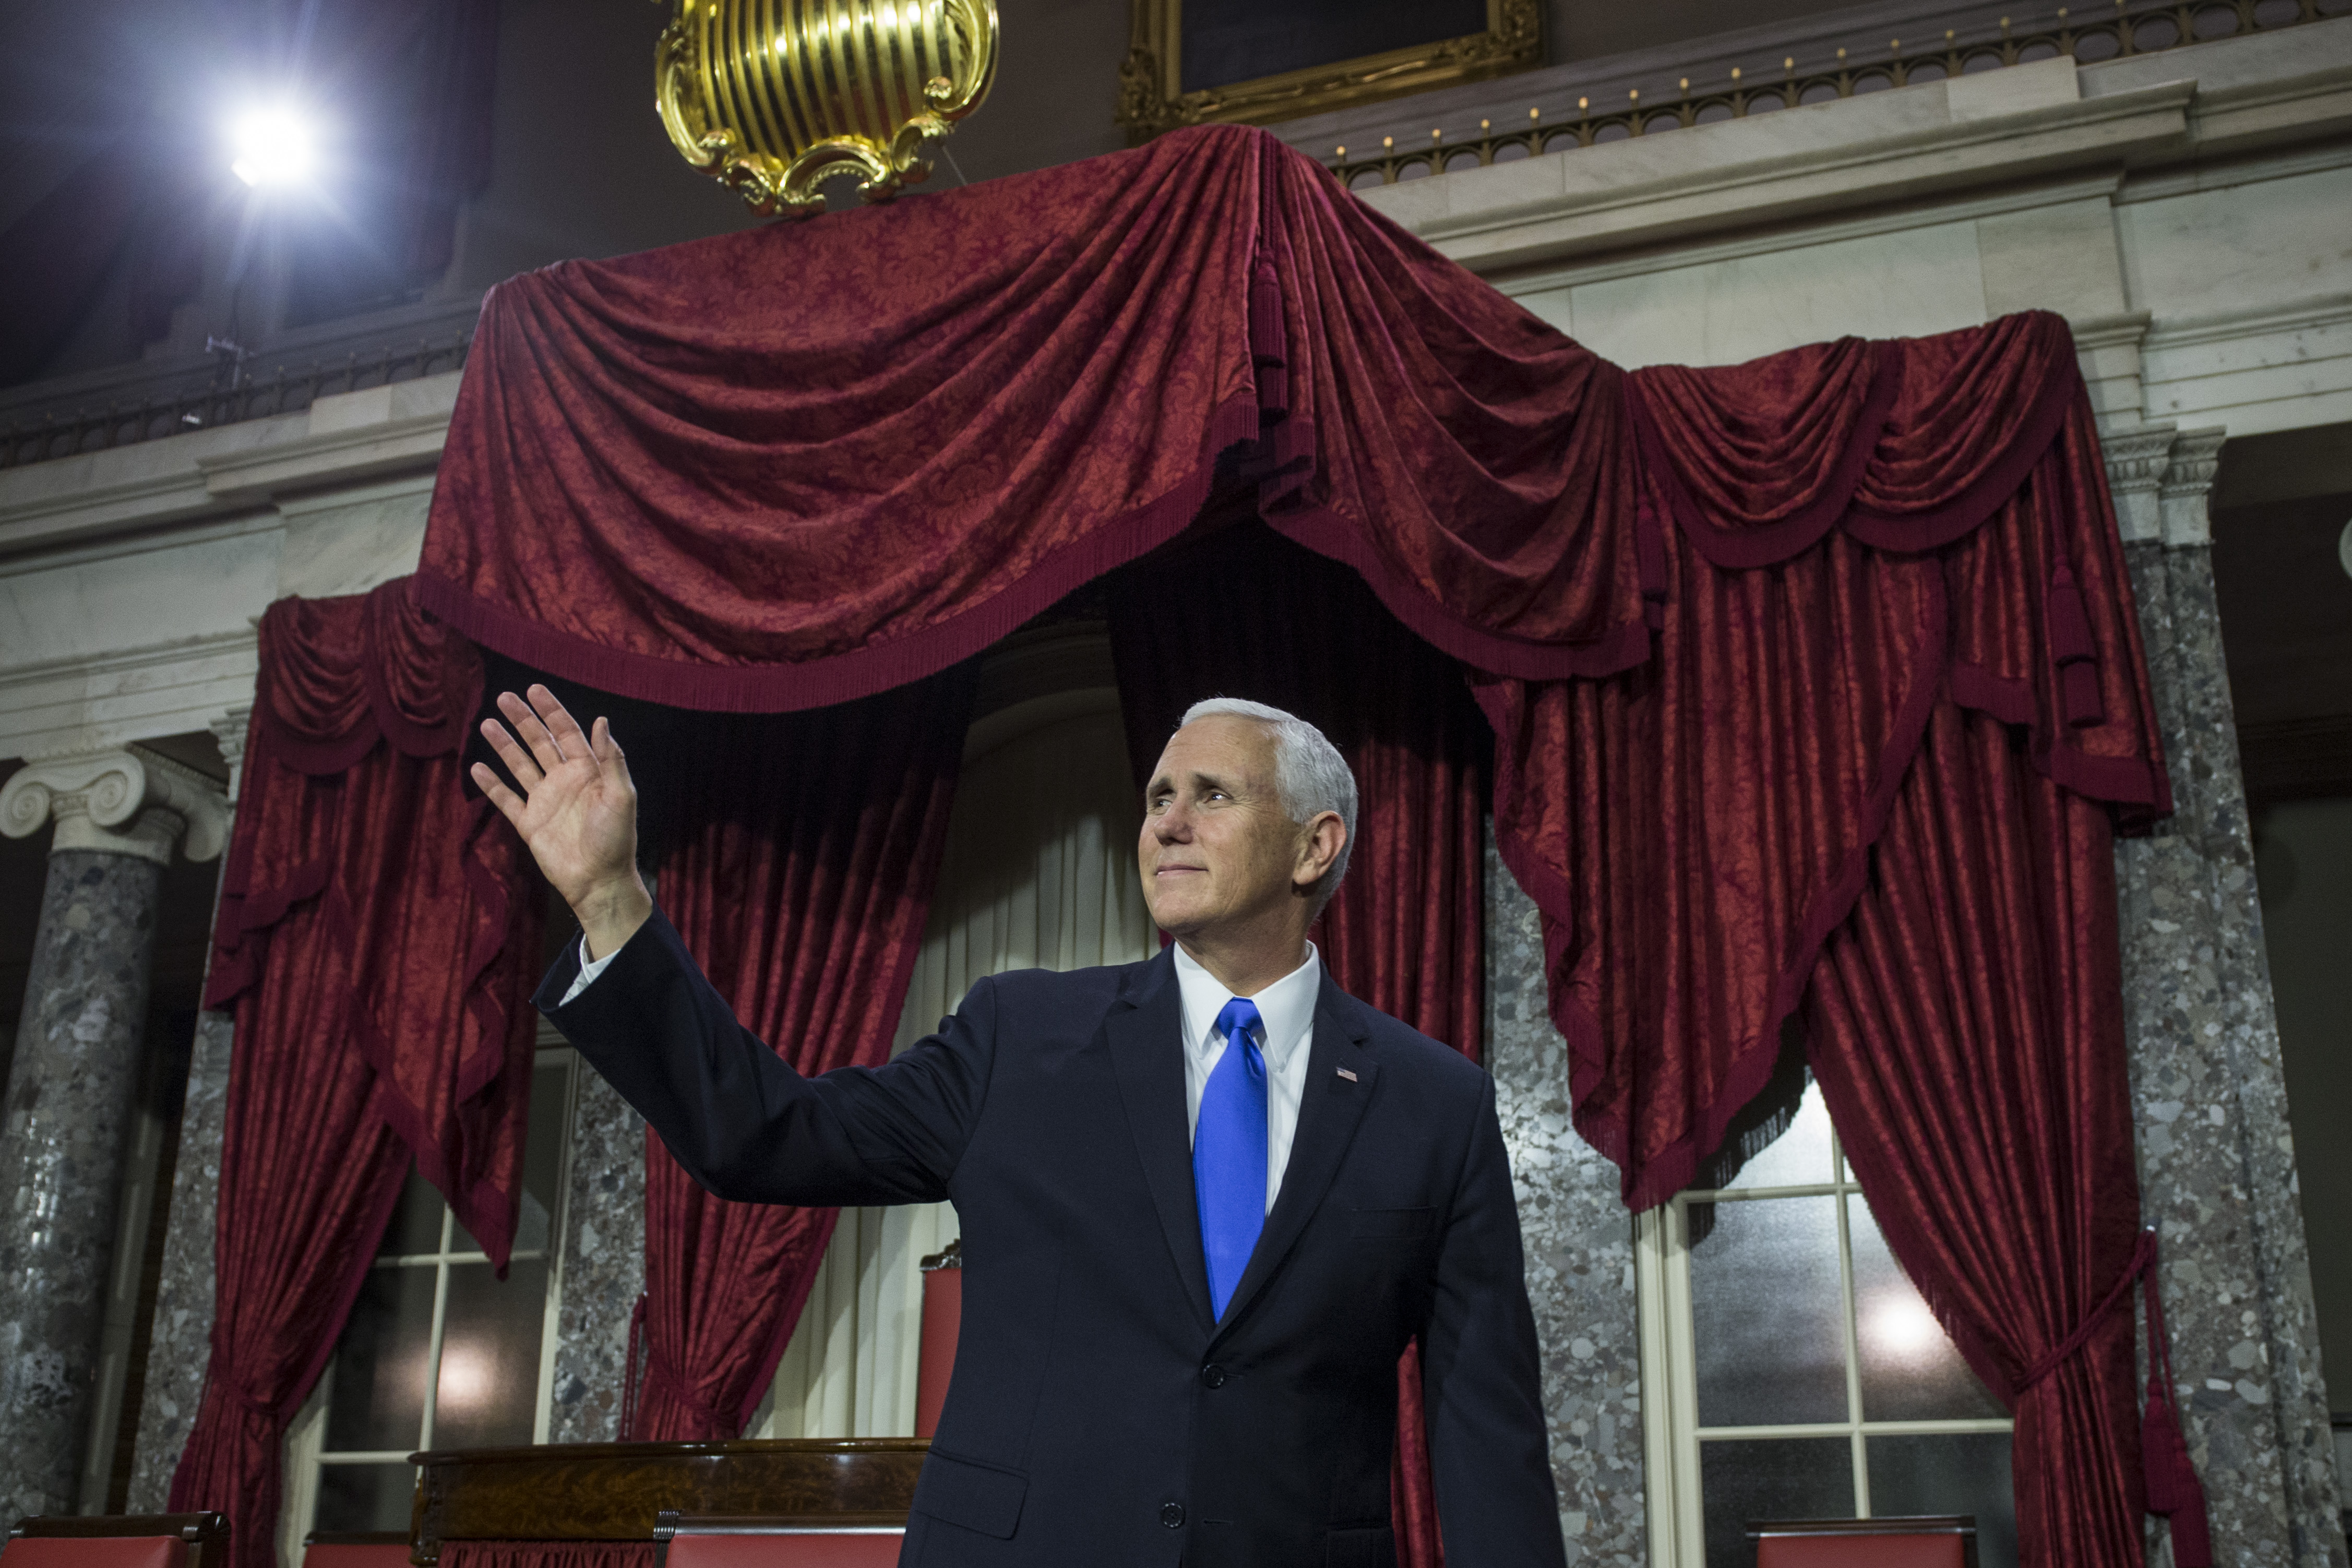 Vice President Mike Pence waves after a mock swearing in ceremony for members of the U.S. Senate on Capitol Hill on January 3, 2019 in Washington, DC. (Photo by Zach Gibson/Getty Images)